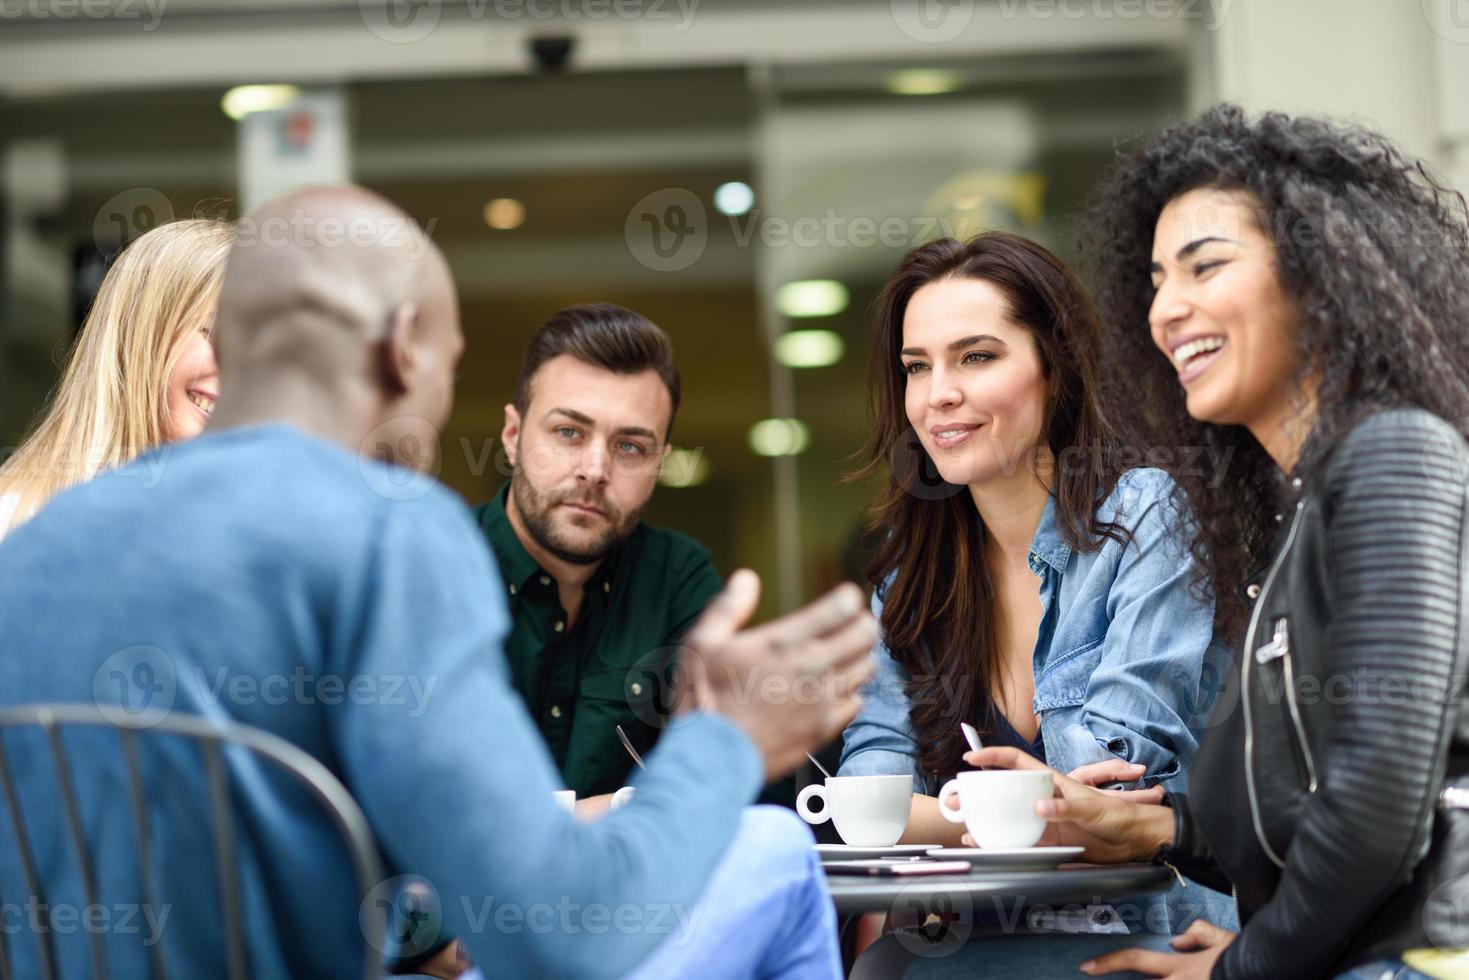 Multiracial group of five friends having a coffee together photo